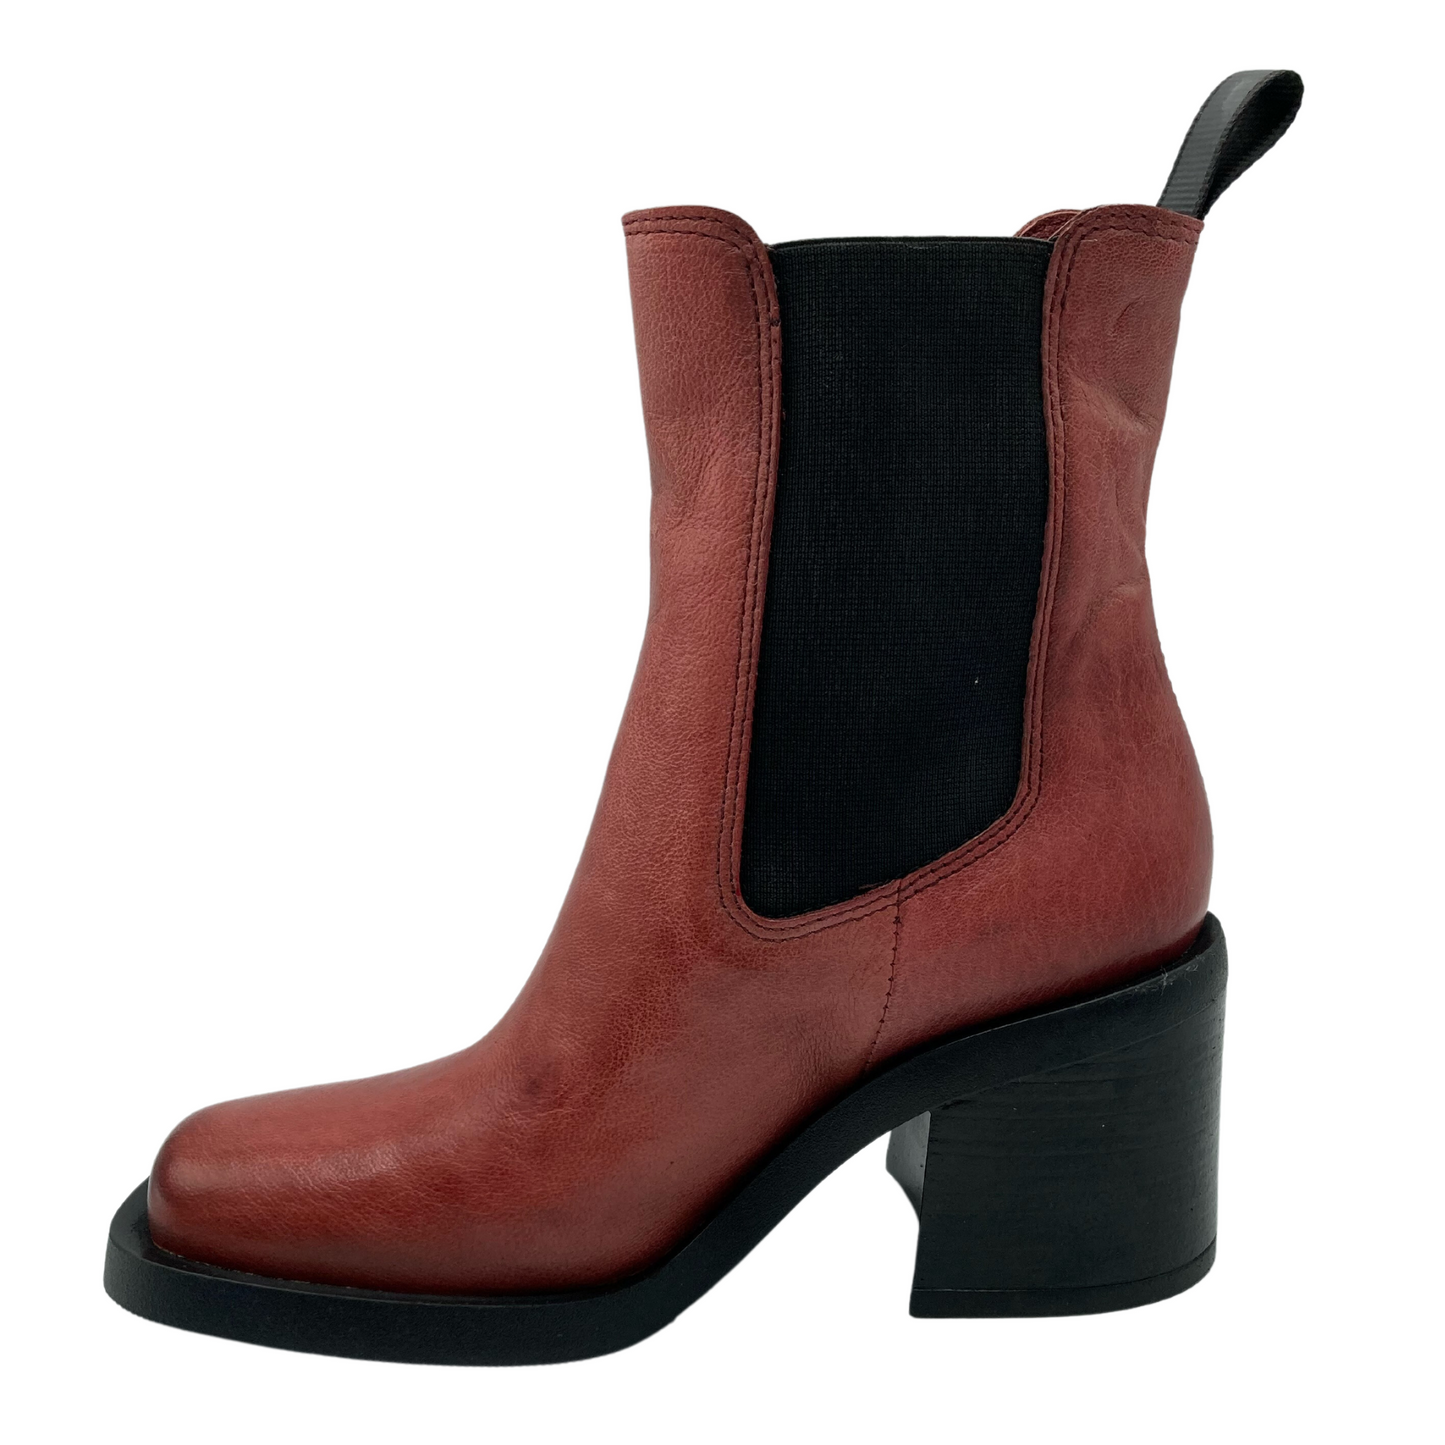 Left facing view of red/orange chunky heeled boot with black sole